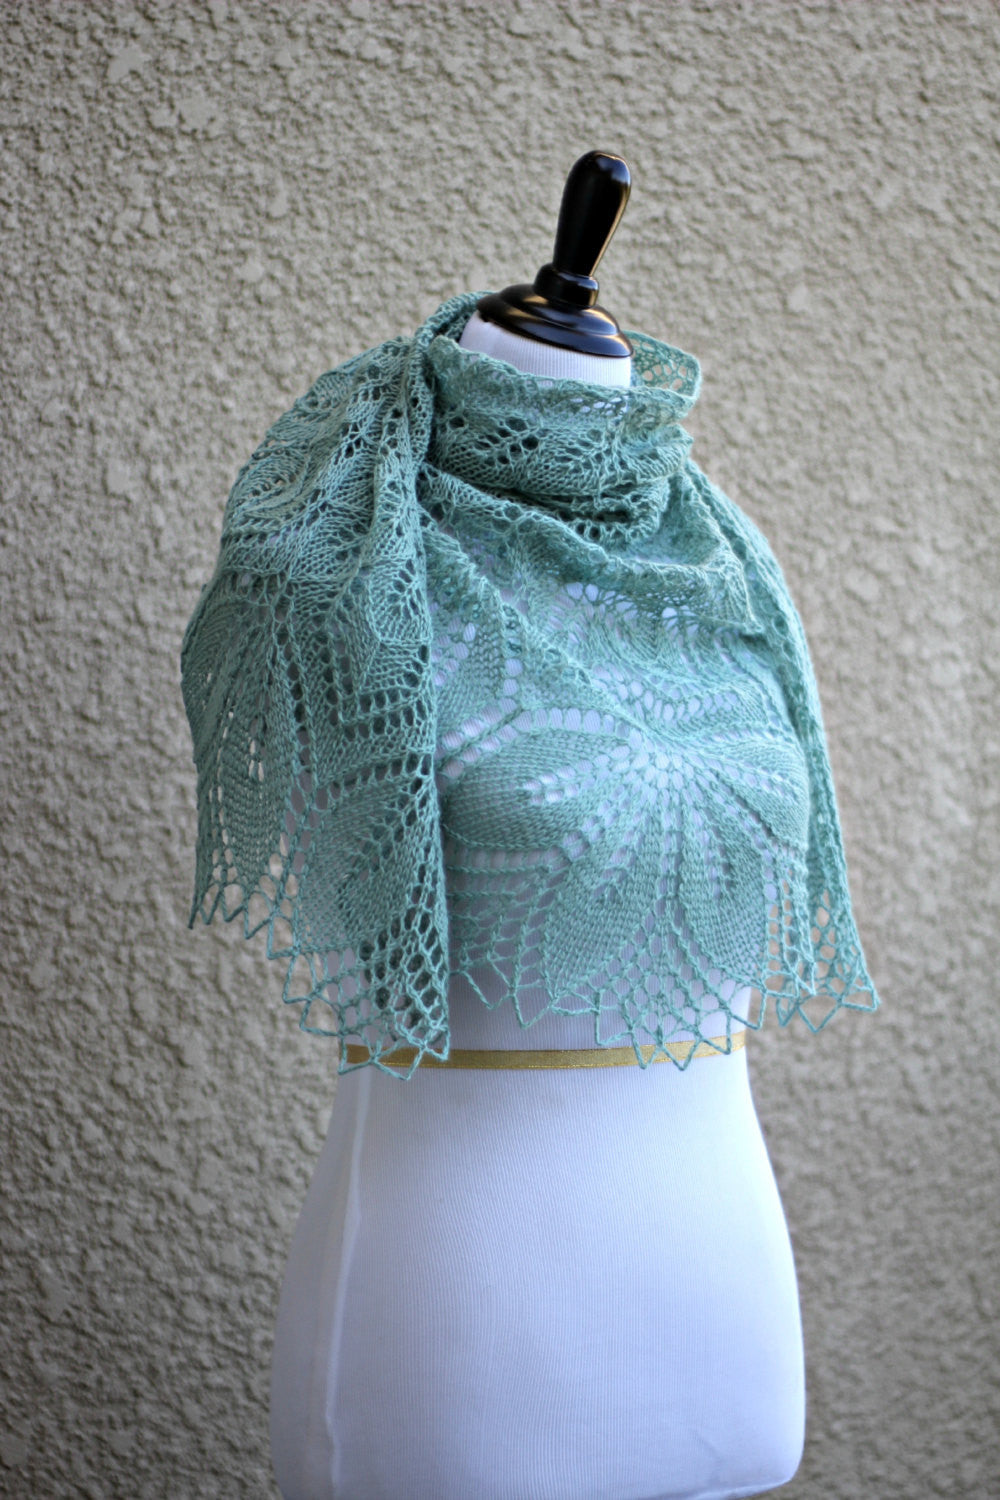 Olive green lace shawl